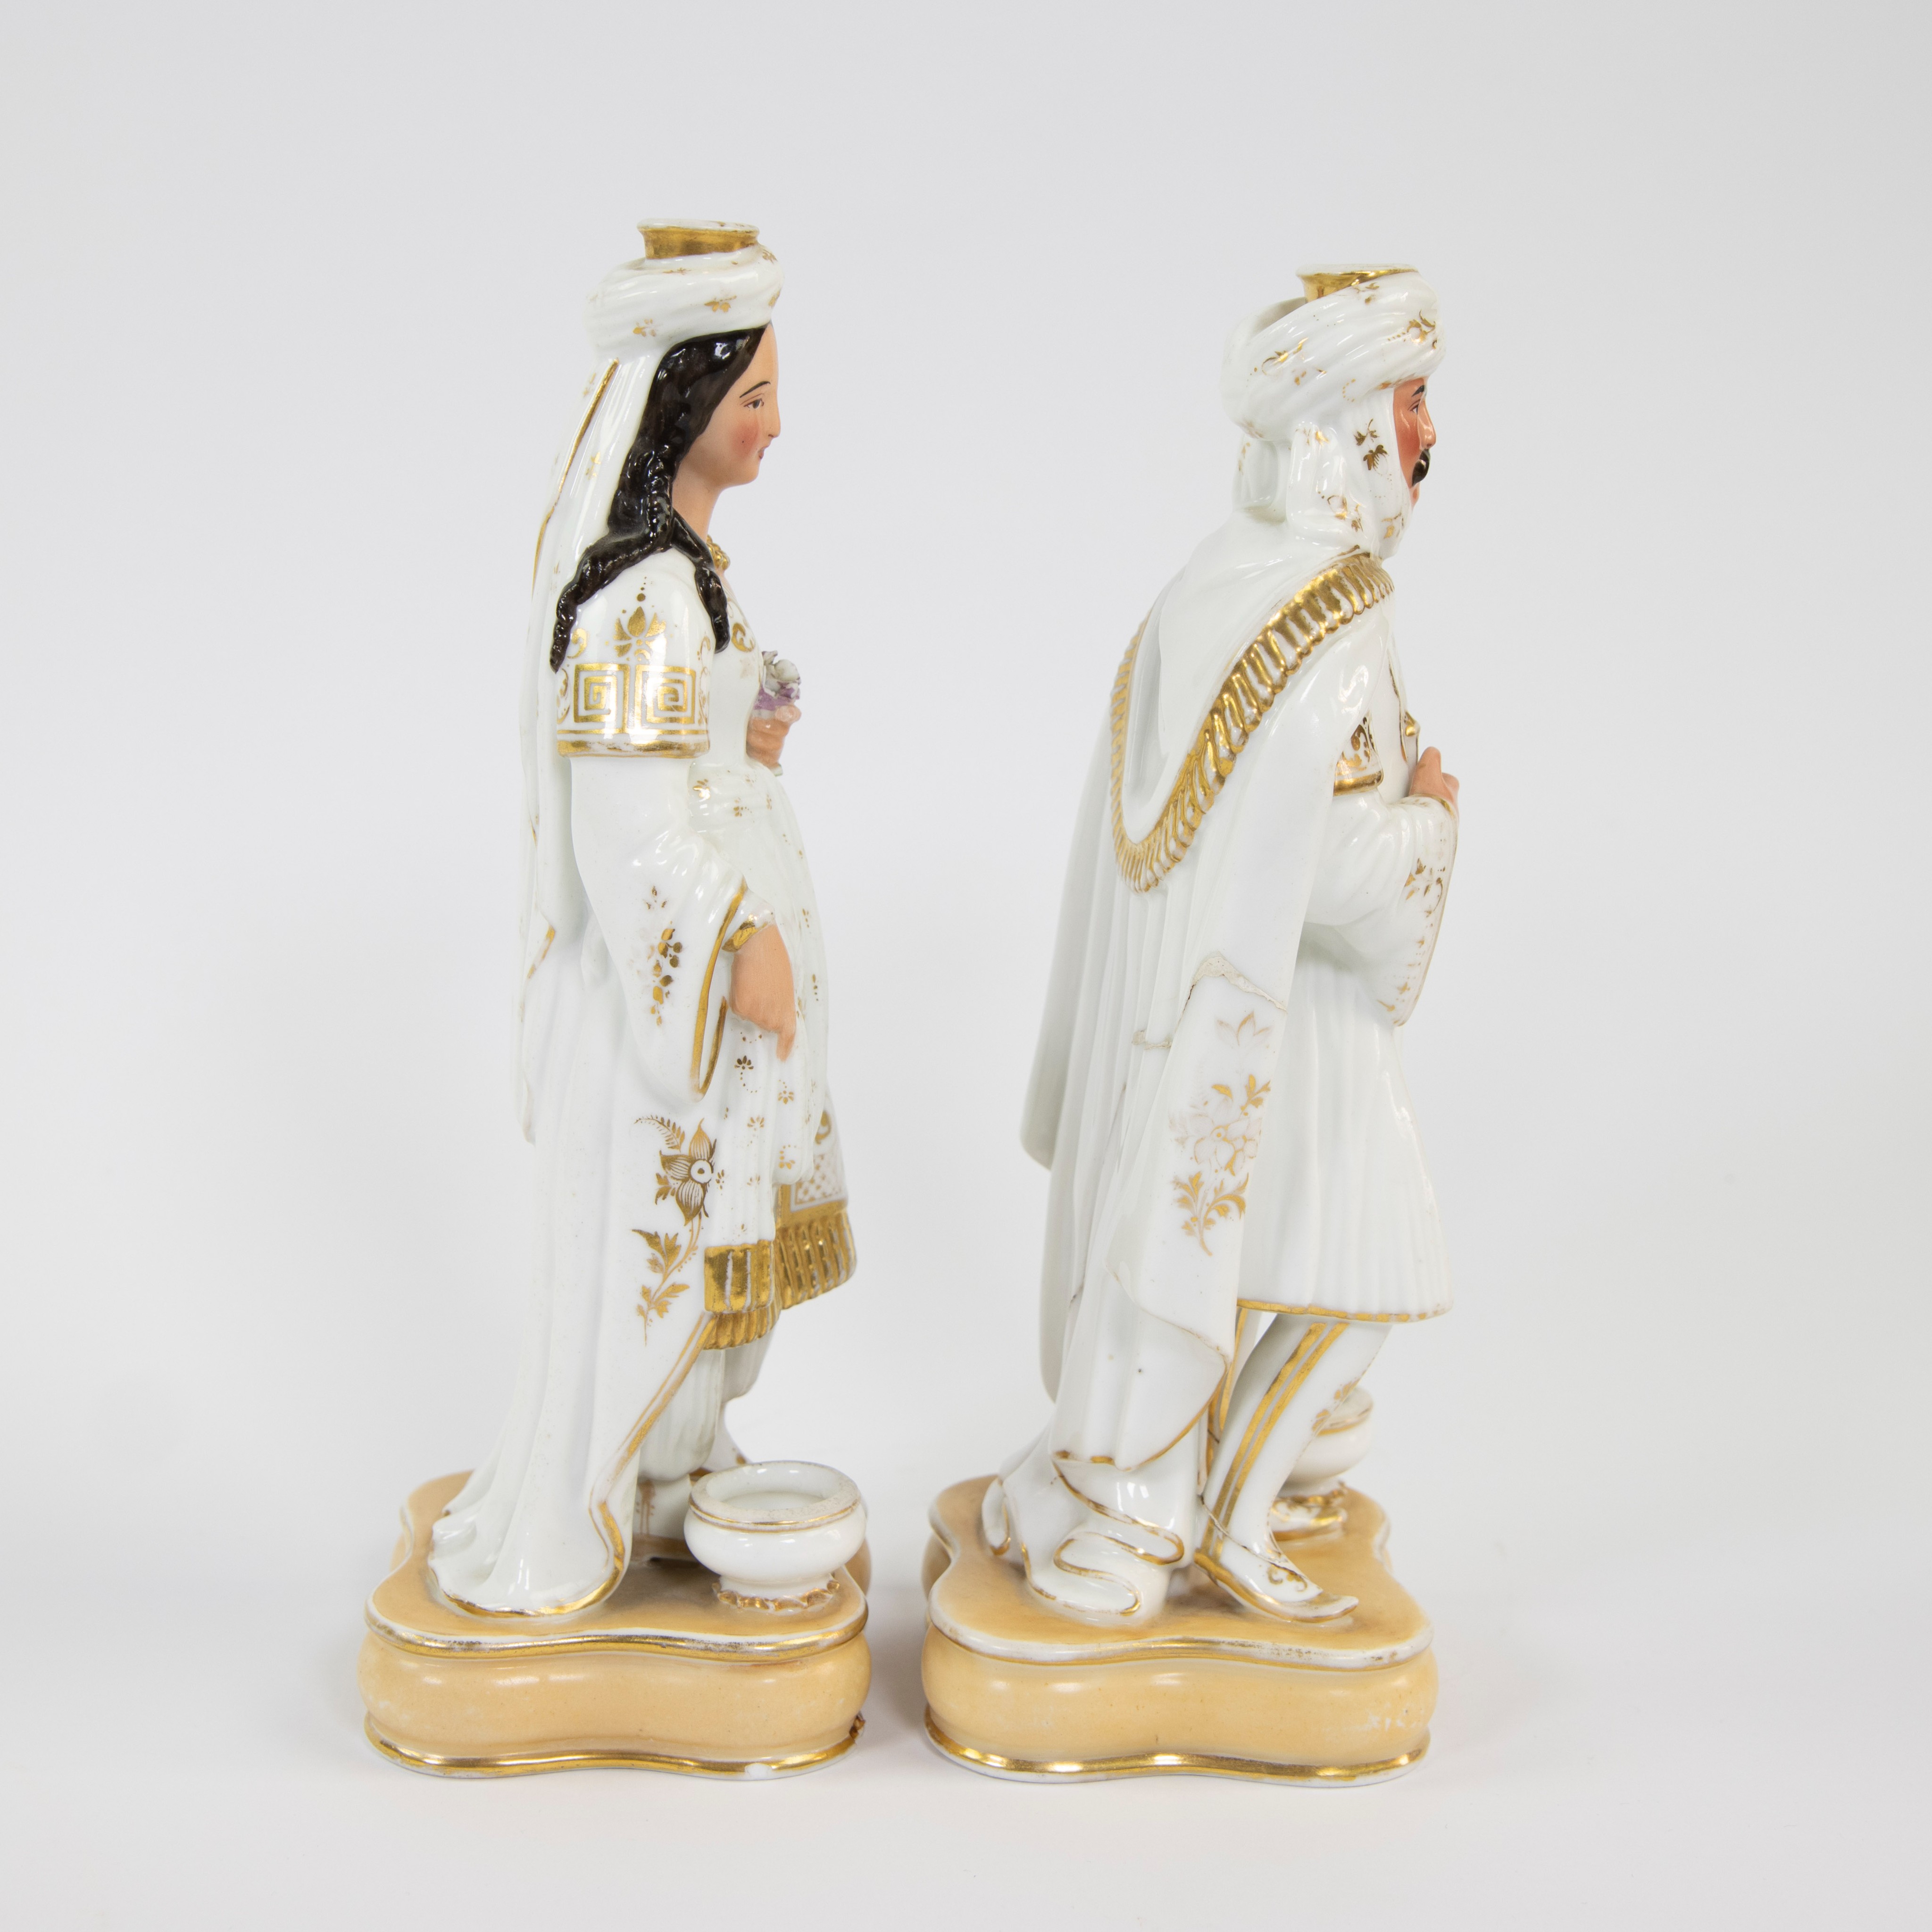 JACOB-PETIT (1796-1868), perfume bottles in the form of a Sultan and Sultana, marked j.p. - Image 4 of 6